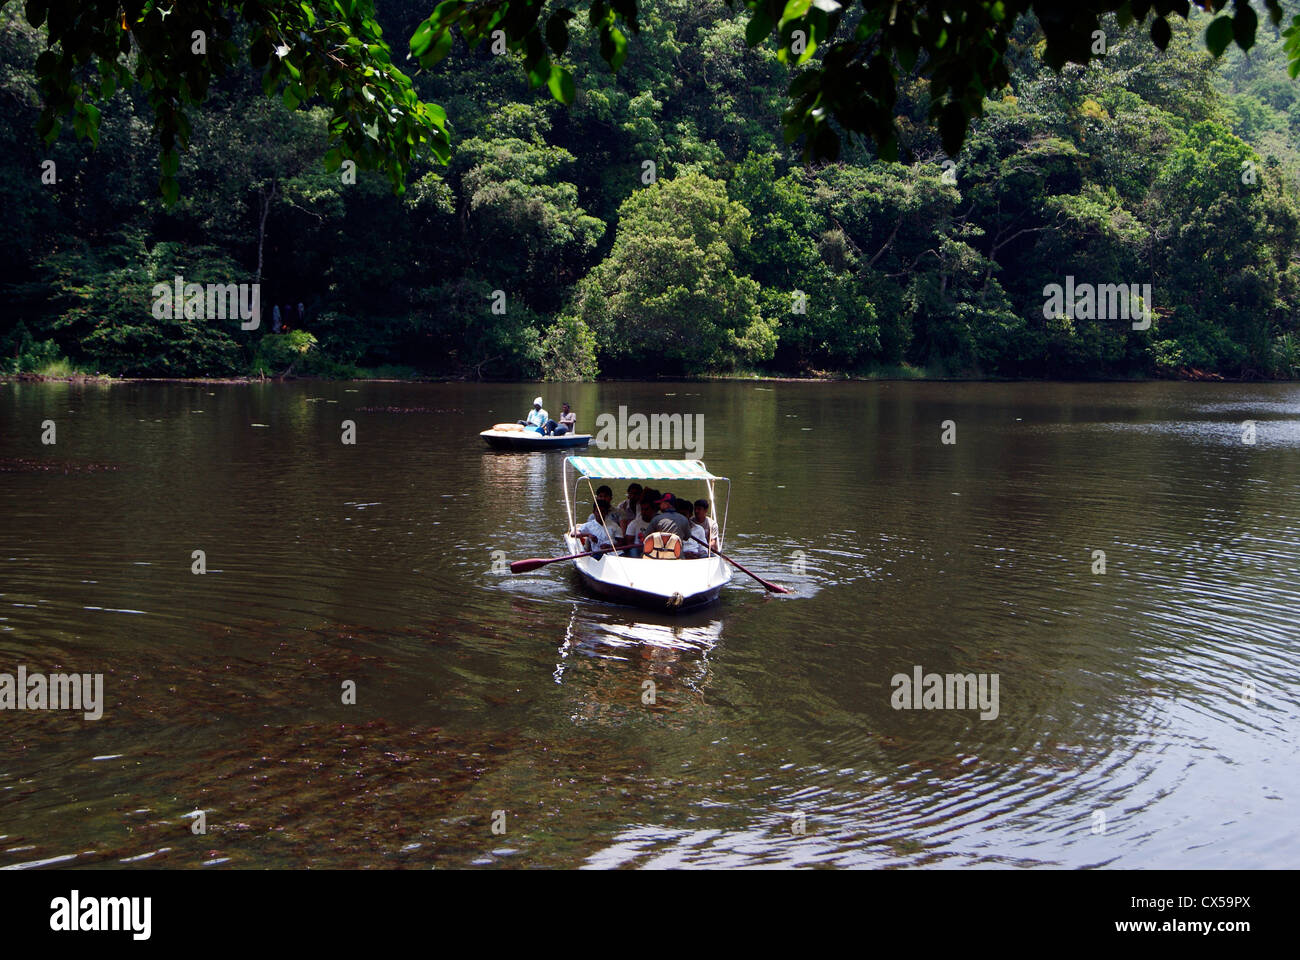 Boating in Freshwater lake of Pookode or pookot lakes scenic Wayanad forest landscapes at Kerala,India Stock Photo